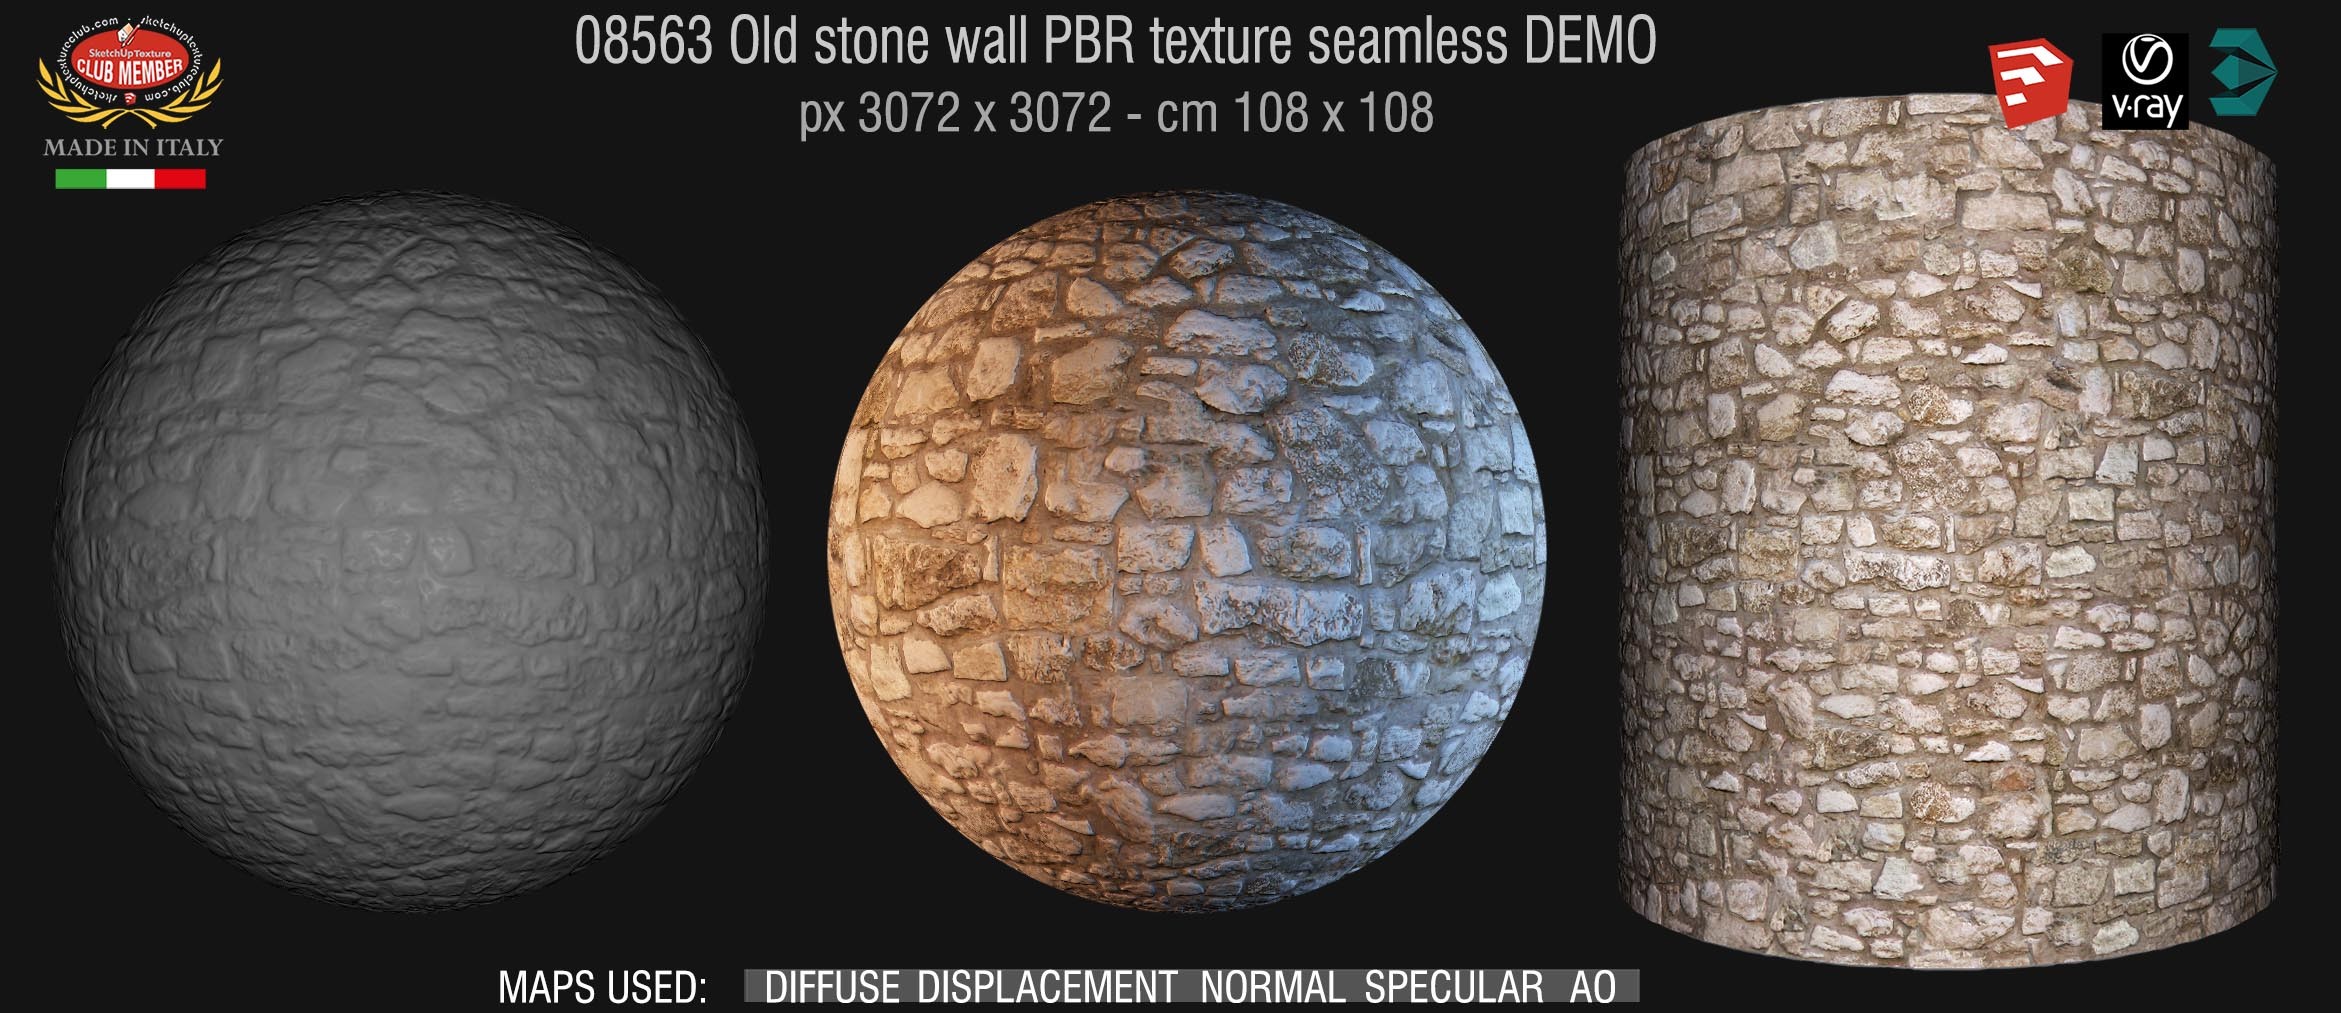 08563 Old stone wall PBR texture seamless DEMO